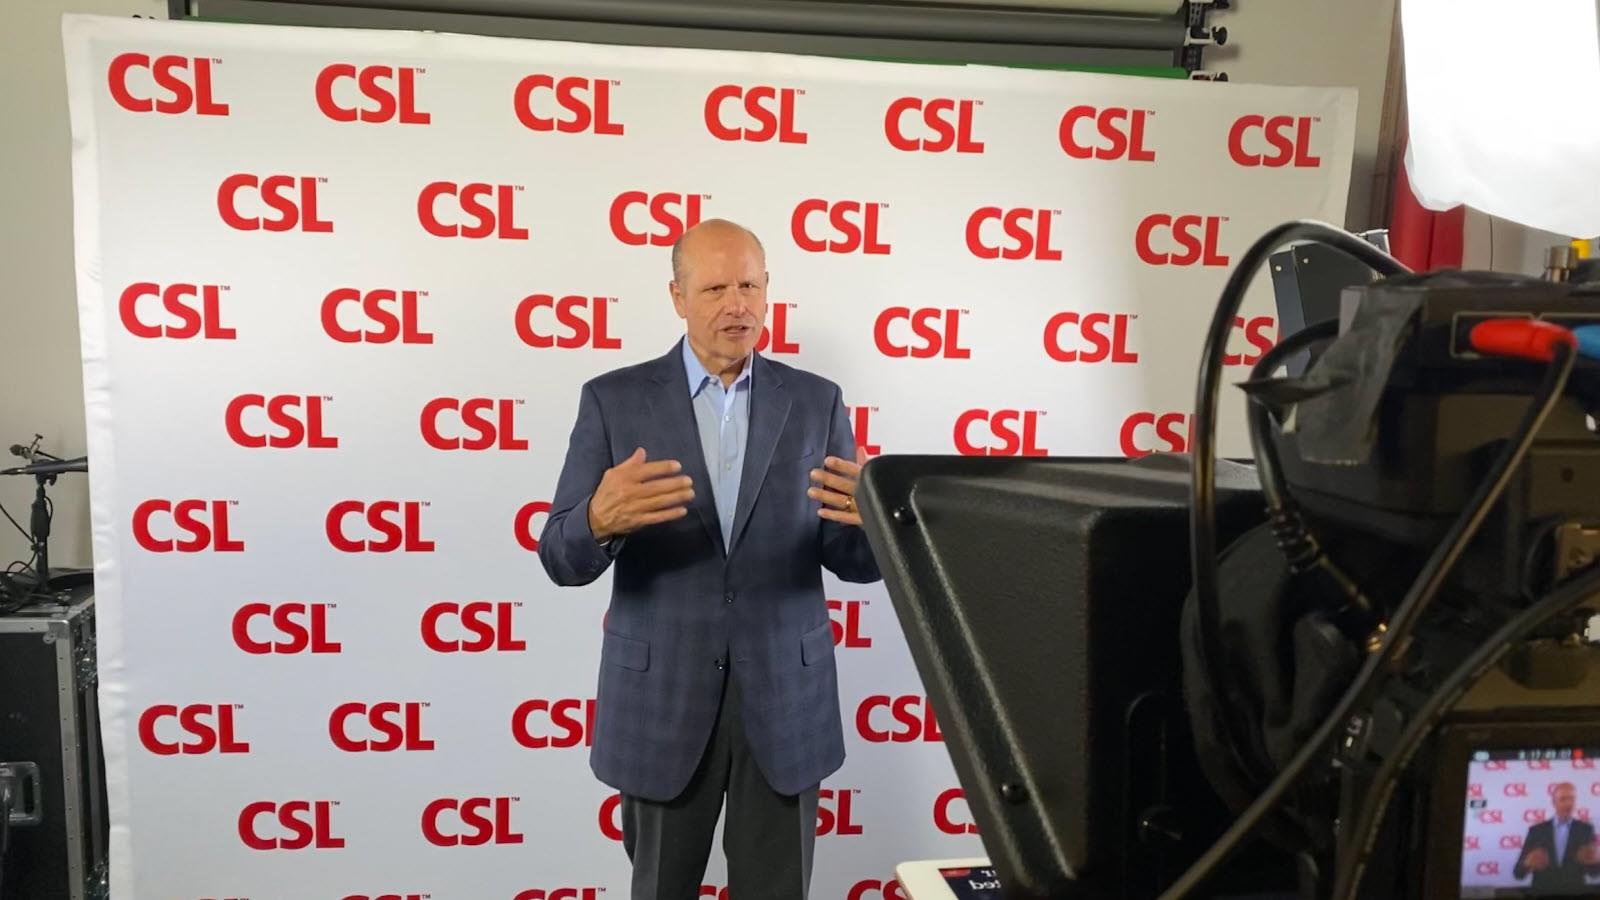 CSL Limited CEO Paul Perreault records a video for employees in the King of Prussia, Pennsylvania studio.